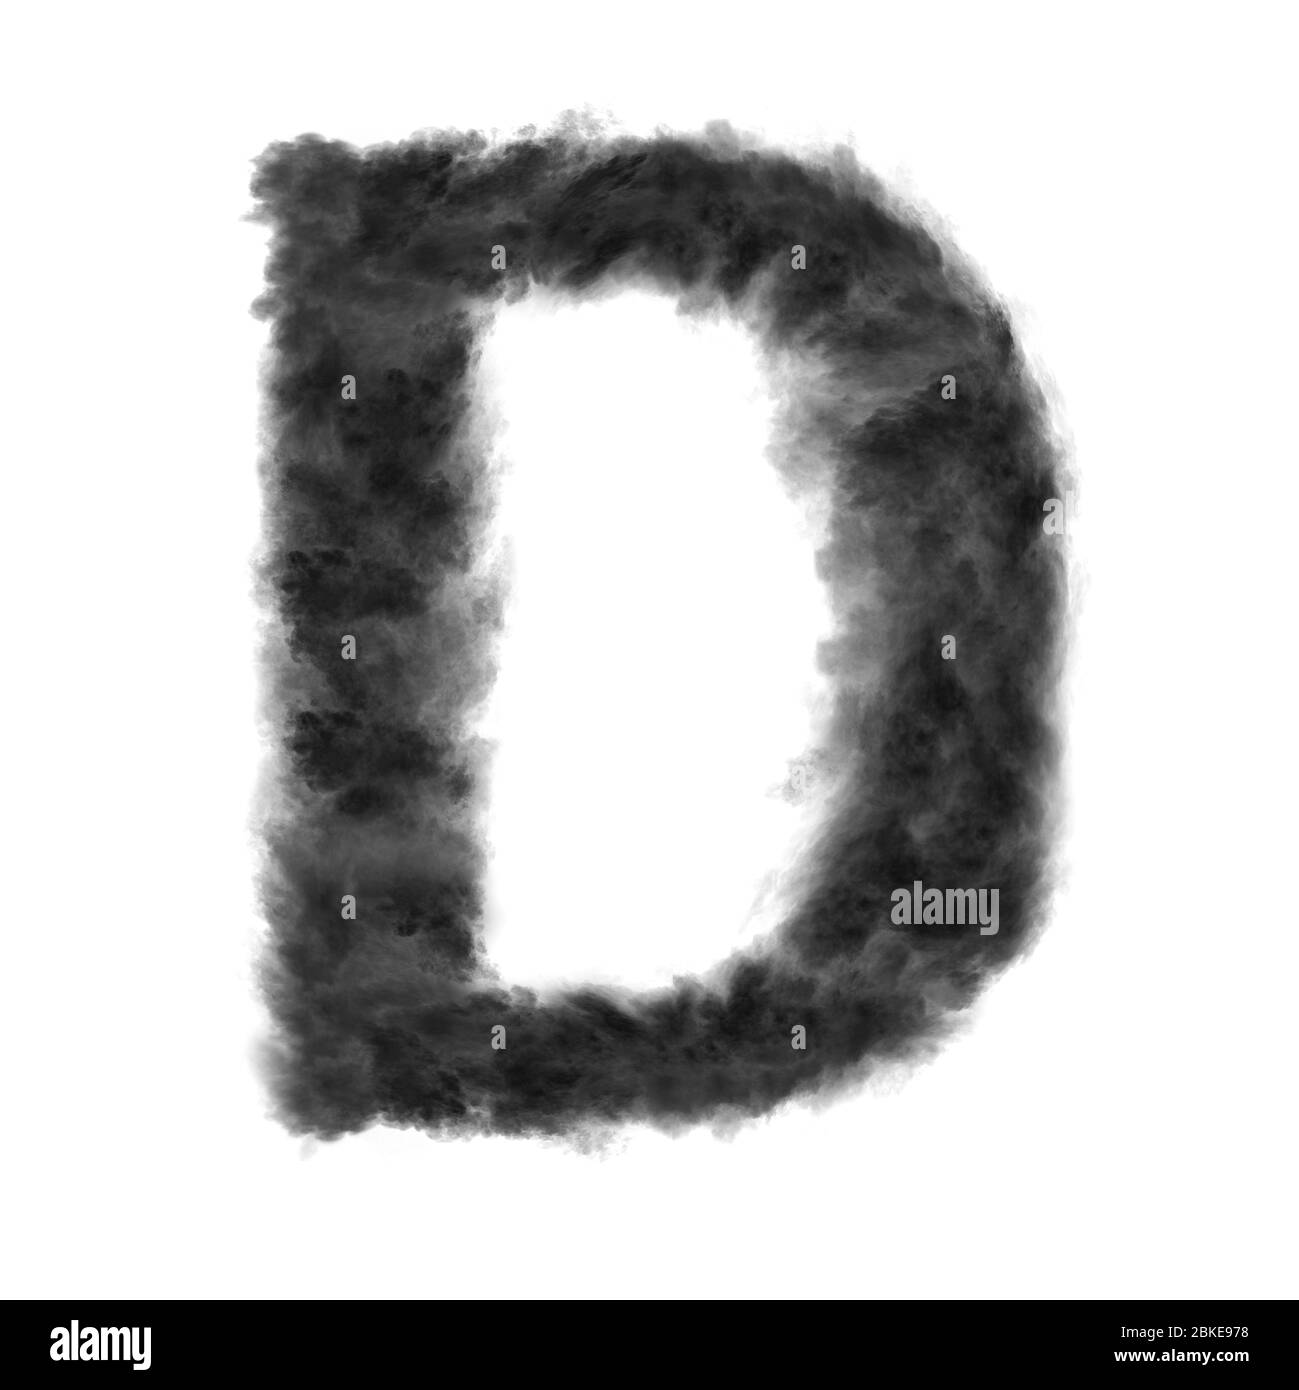 Letter D made from black clouds on a white background. Stock Photo